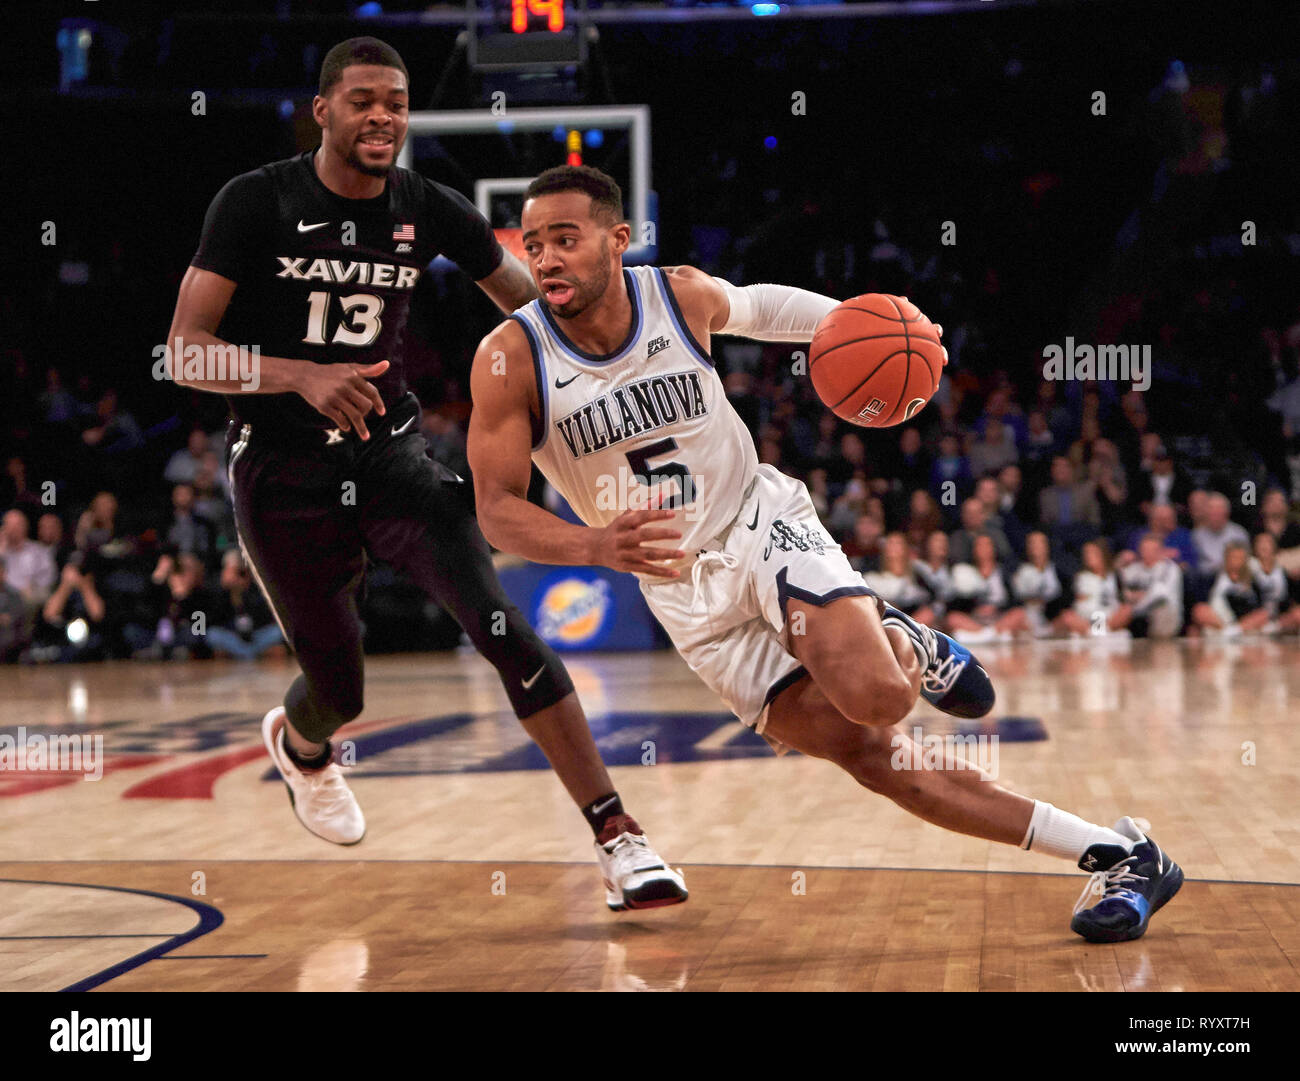 New York, New York, USA. 15th Mar, 2019. Villanova Wildcats guard Phil Booth (5) drives to the basket n the first half during semifinal round of the Big East Tournament between the Xavier Musketeers and the Villanova Wildcats at Madison Square Garden in New York City. Duncan Williams/CSM/Alamy Live News Stock Photo